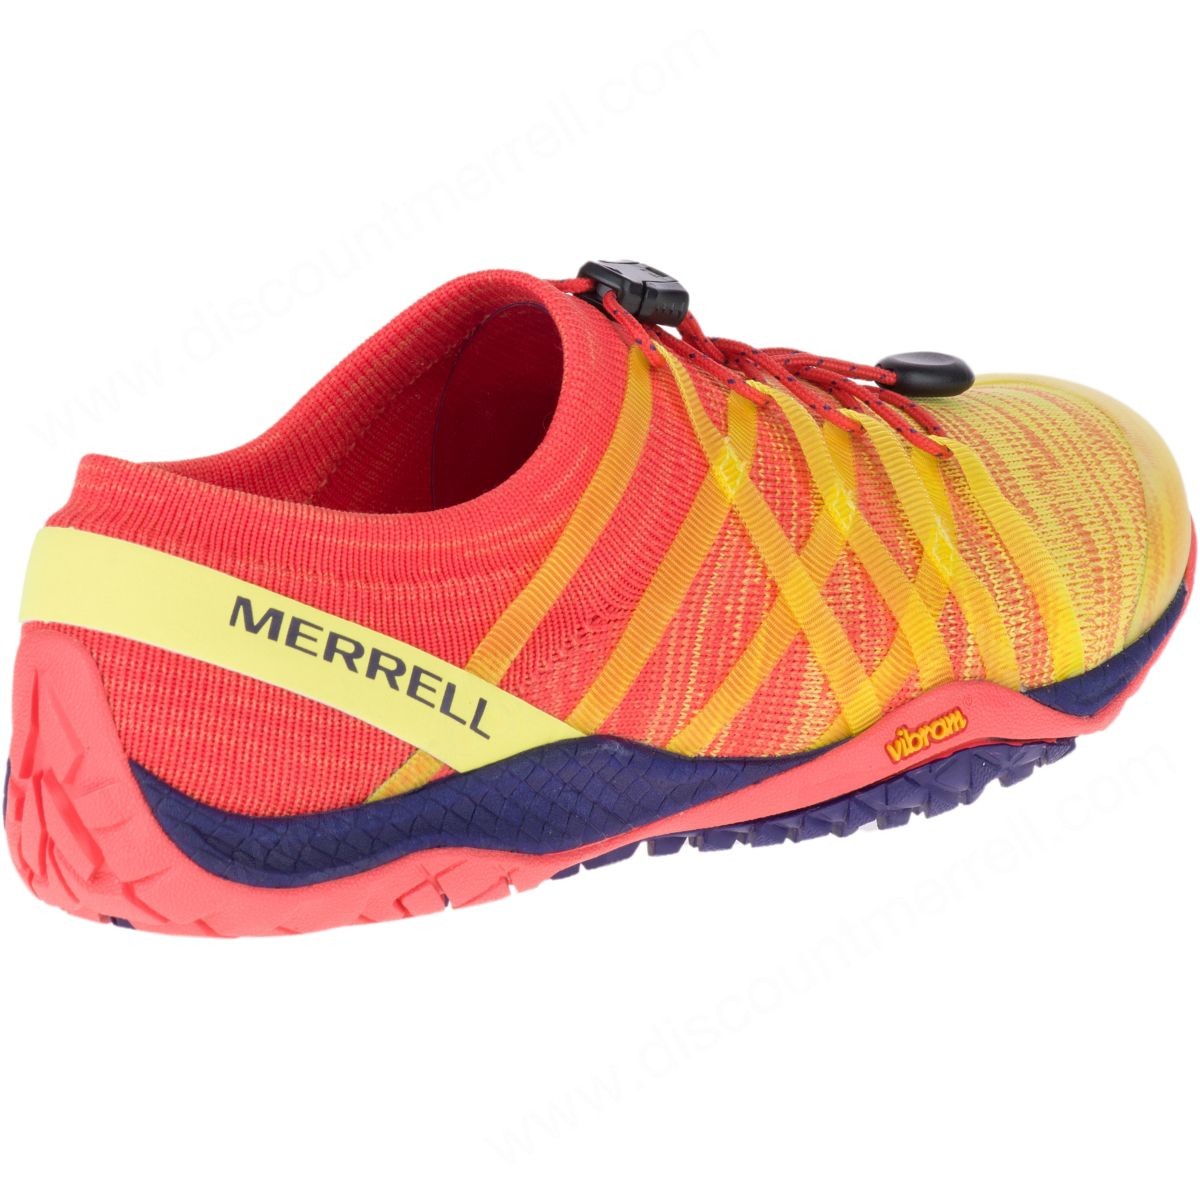 Merrell Lady's Trail Glove Knit Hot Coral - -7